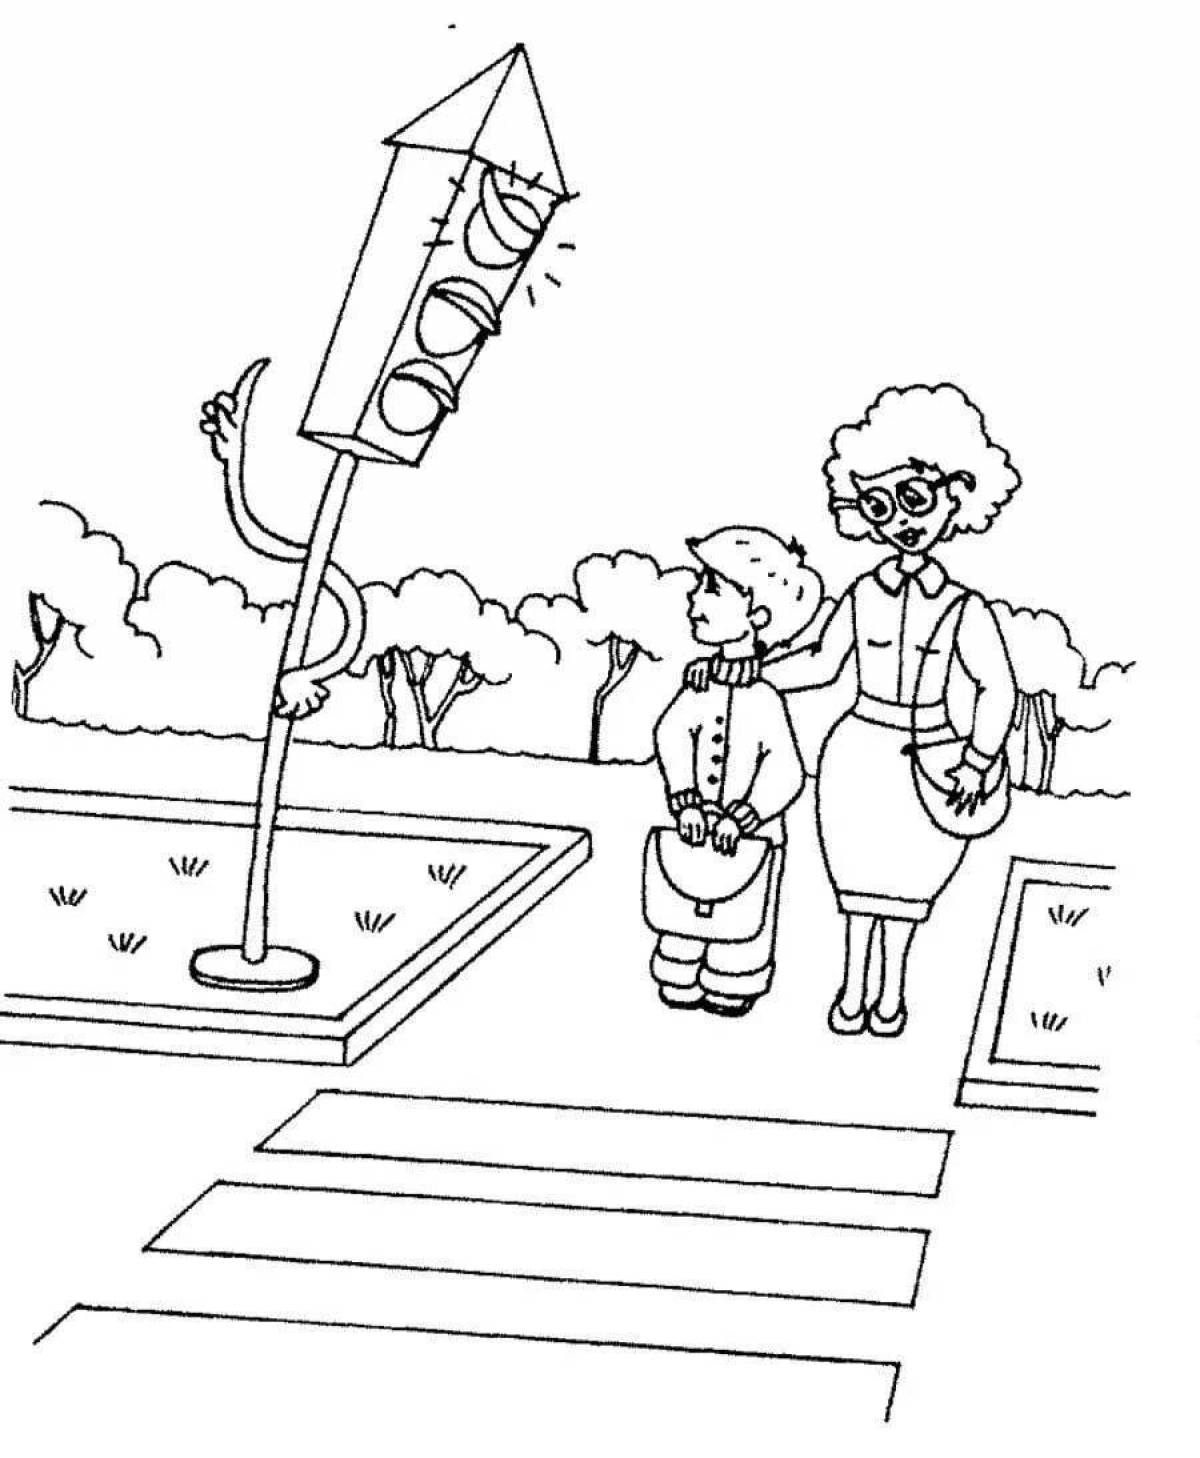 Drawings for kids traffic rules for kids #19